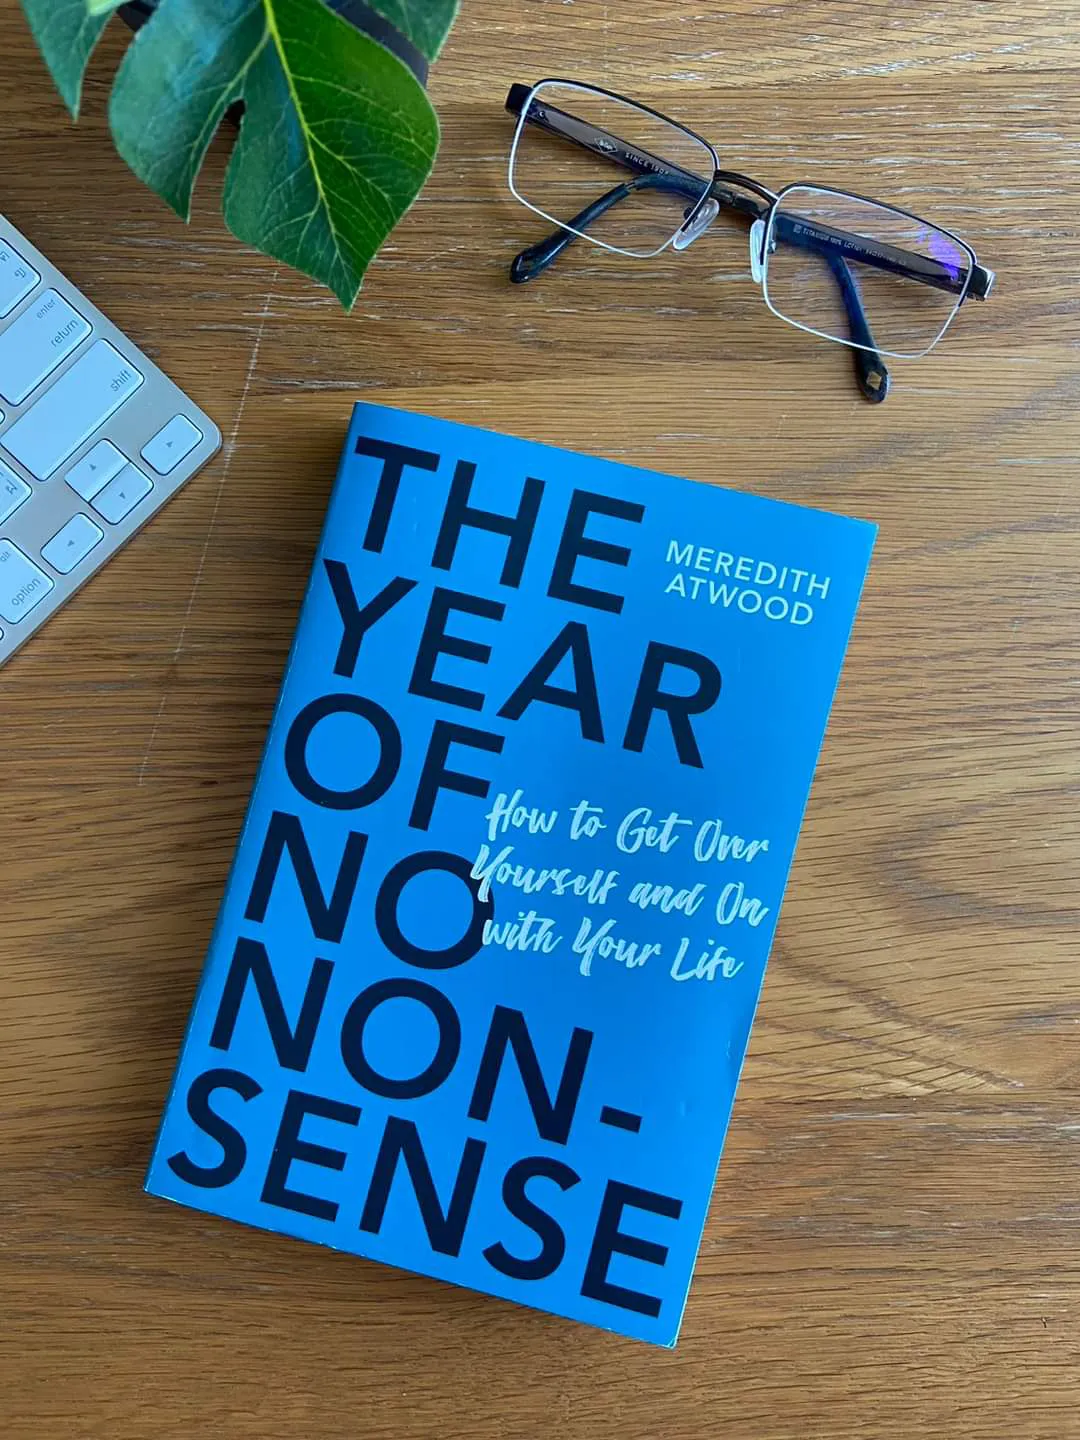 Meredith Atwood's Latest Book “The Year of No Nonsense” Will Change Your  Life with a Simple Question